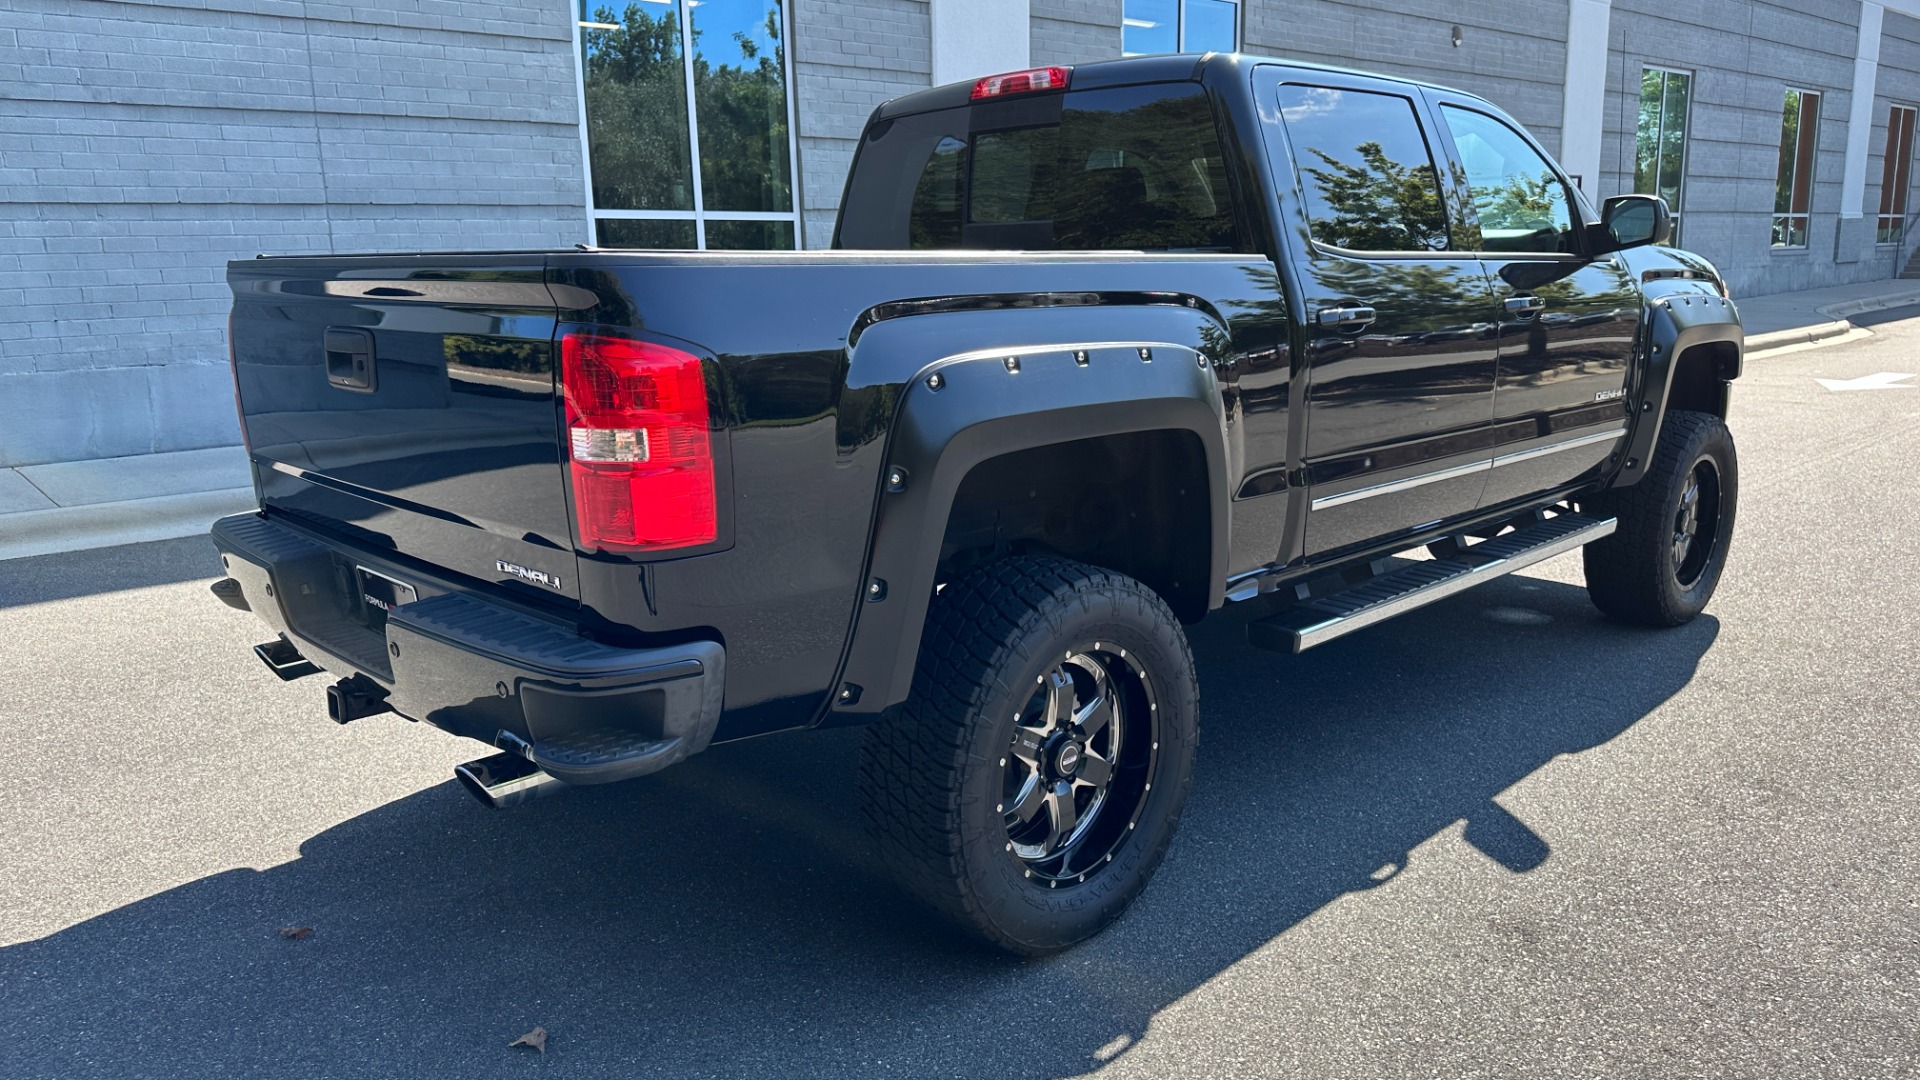 Used 2015 GMC Sierra 1500 DENALI / LIFT KIT / UPGRADED WHEELS / SUNROOF / 6.2L V8 for sale $33,995 at Formula Imports in Charlotte NC 28227 7